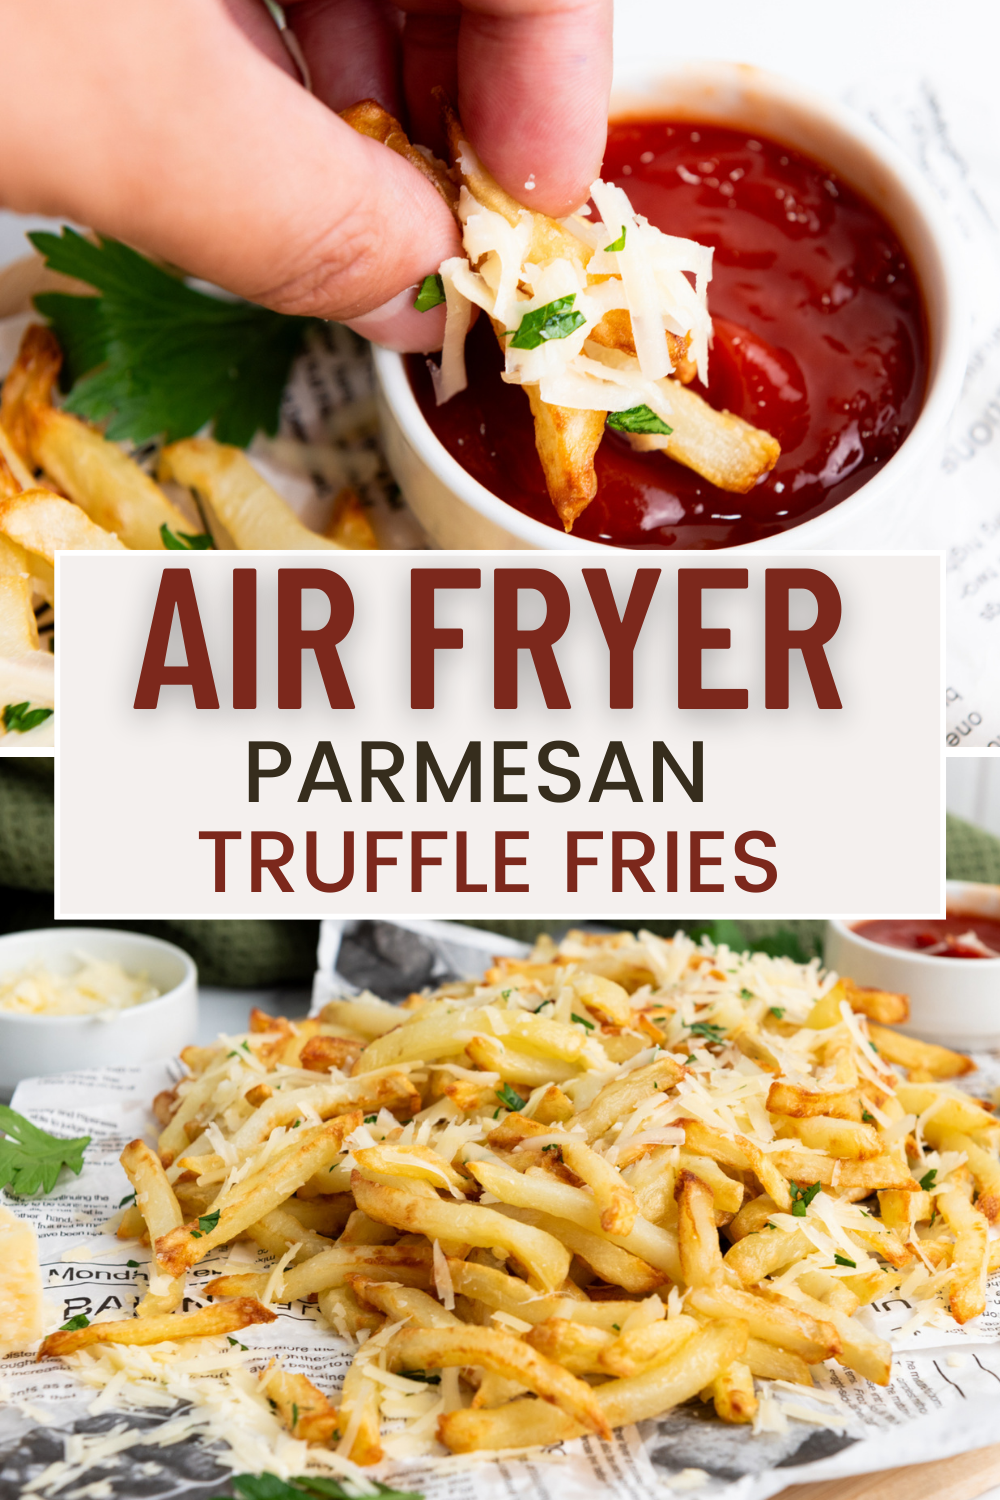 These Air Fryer Parmesan Truffle Fries are SO entirely addictive! French fries with the intense aroma of black truffles, oozing in delicious, addictive cheese!